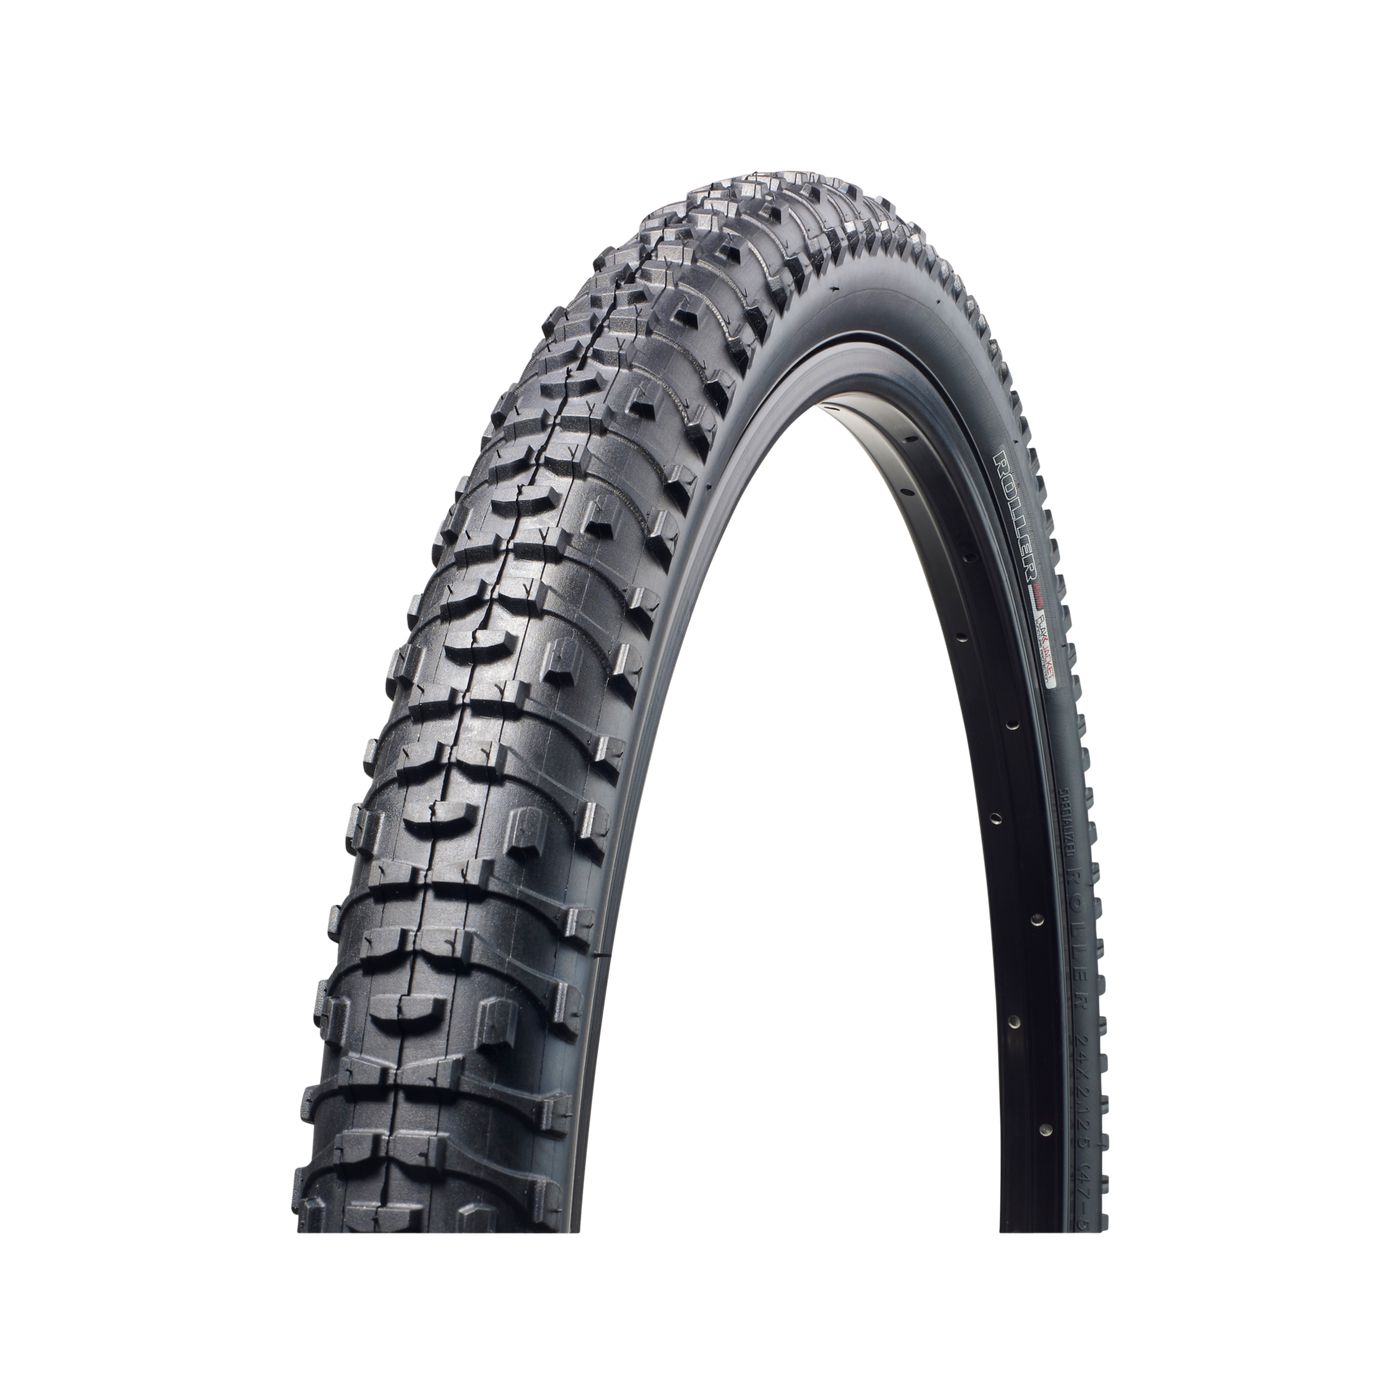 Specialized Roller 20" Bike Tire - Tires - Bicycle Warehouse